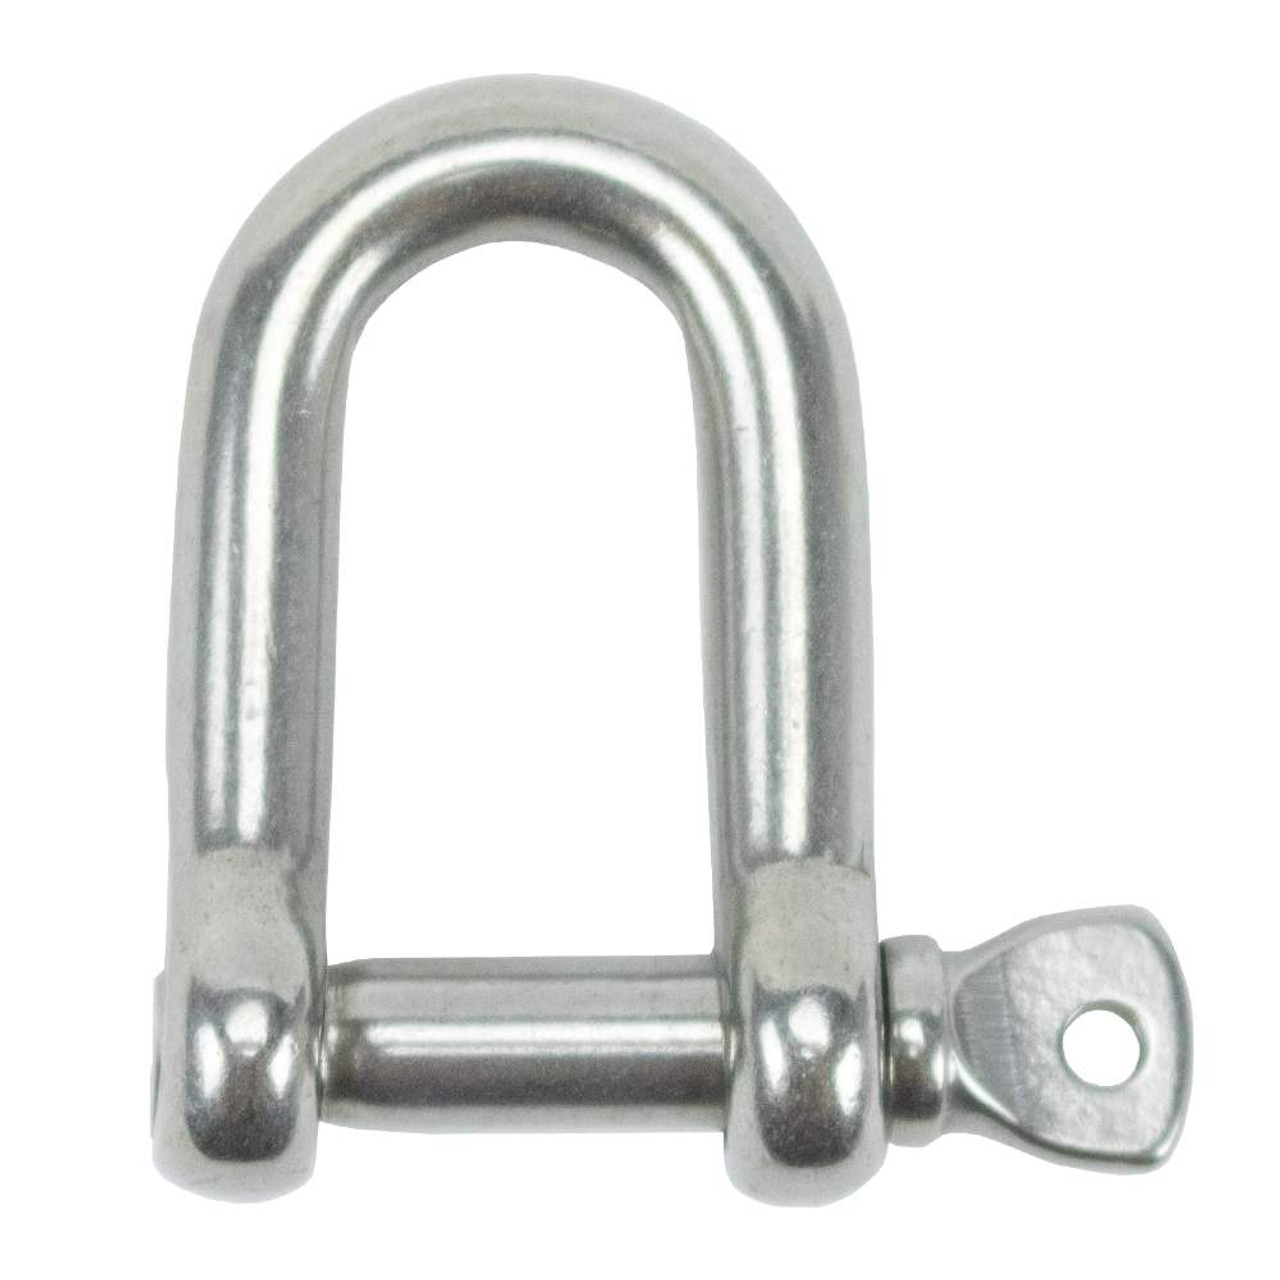 Paracord Planet Wire Rope Clamps - Stainless Steel - Multiple Packs and Sizes, Size: 3 mm, Silver